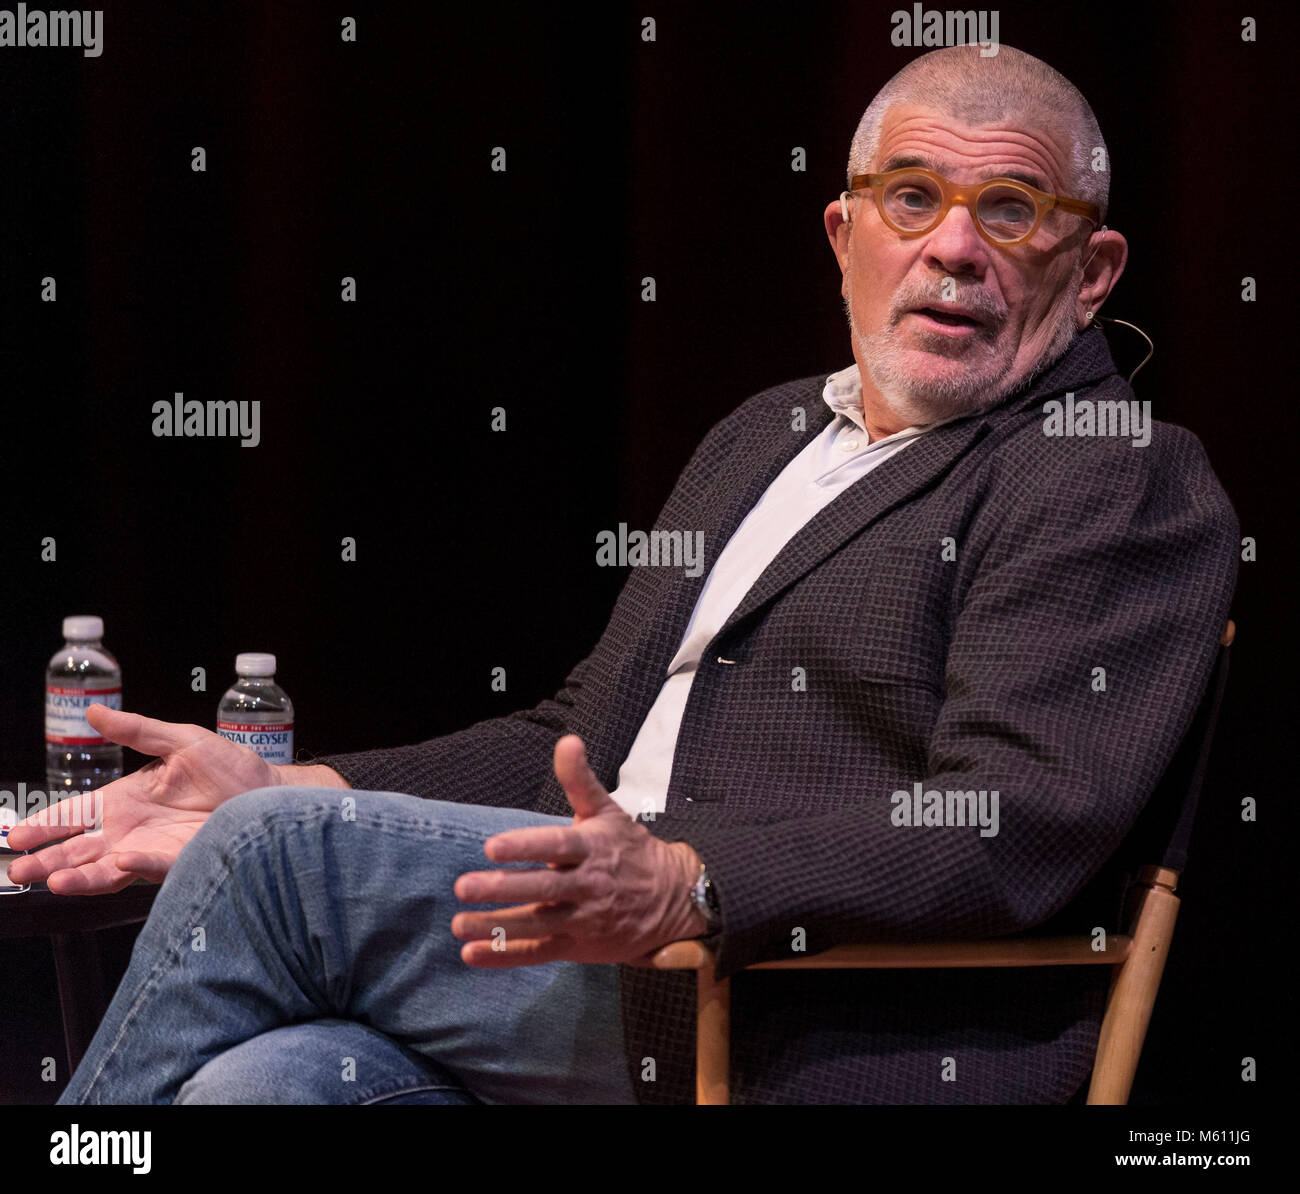 Santa Monica, California, USA. 27th Feb, 2018. DAVID MAMET discusses the writing life and his new novel, 'Chicago', at a Live Talks Los Angeles event. Credit: Brian Cahn/ZUMA Wire/Alamy Live News Stock Photo